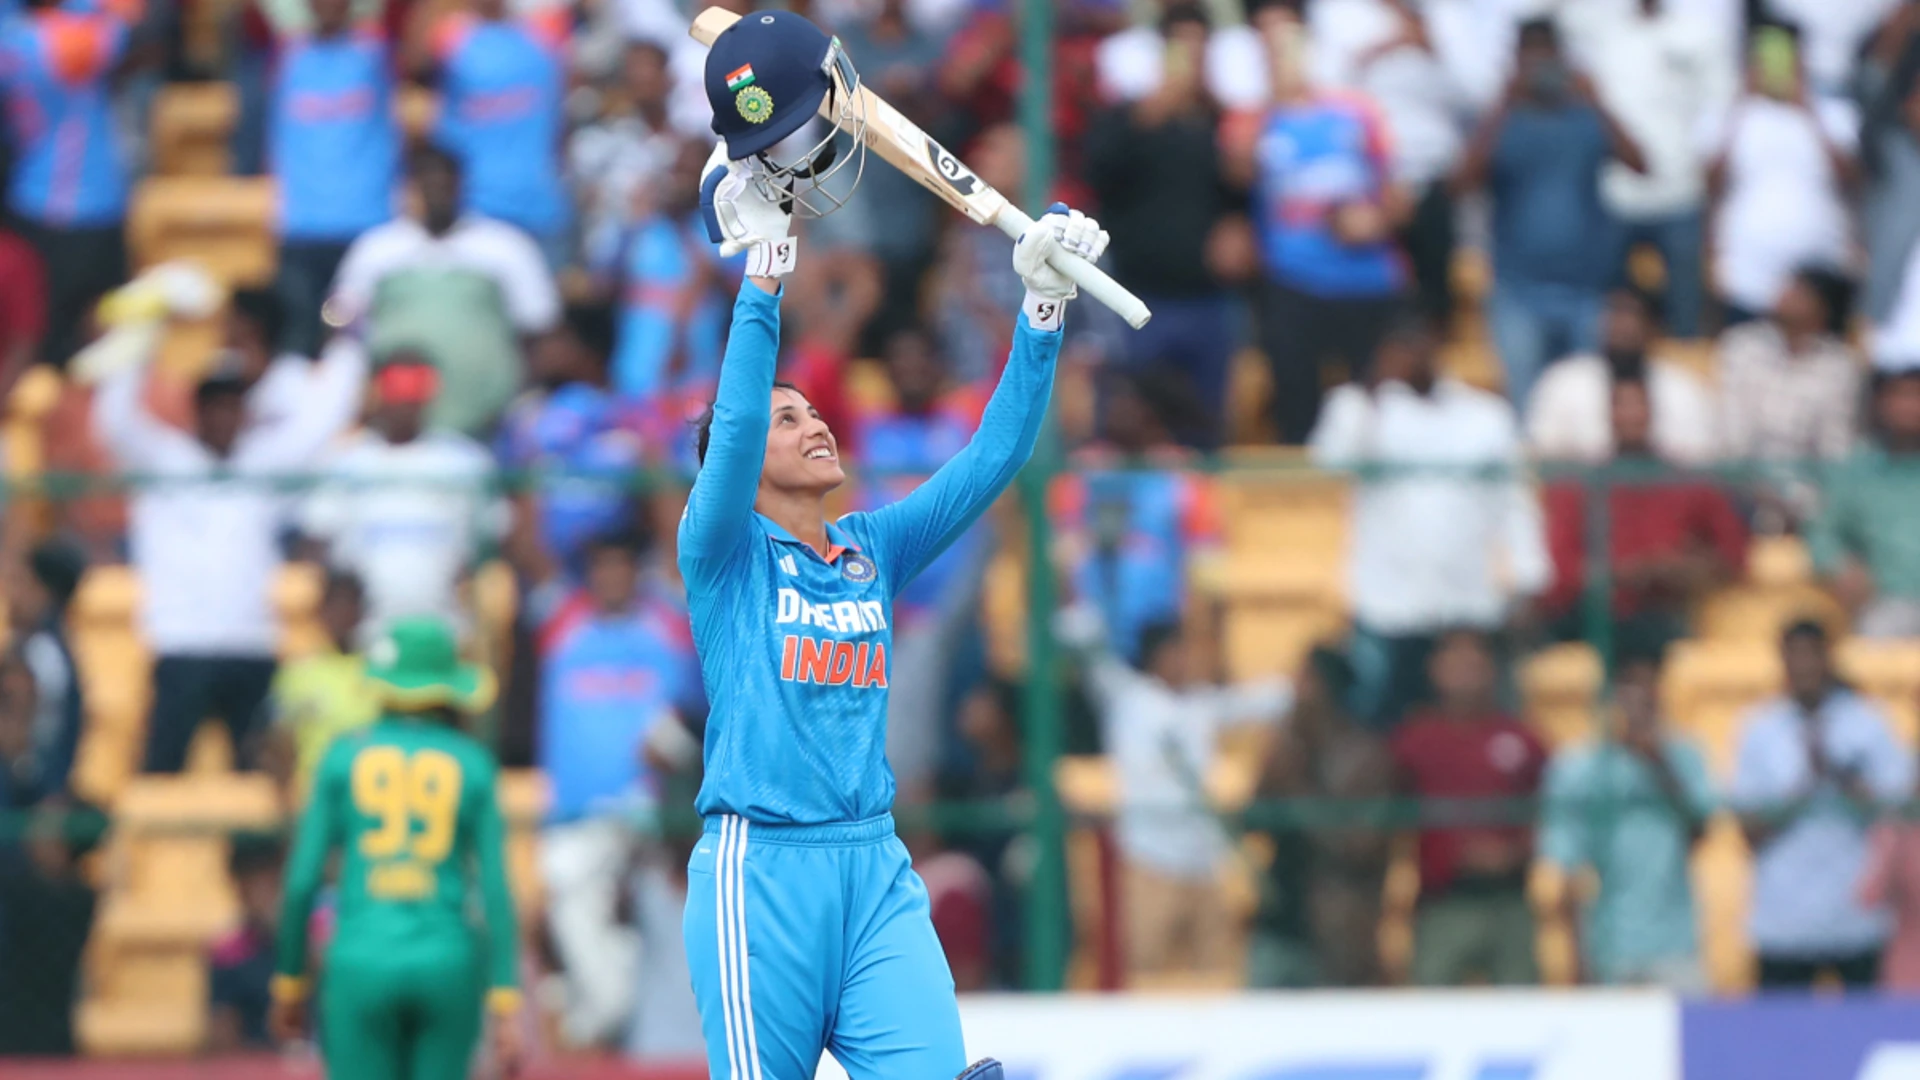 Mandhana stands tall as India post a competitive total